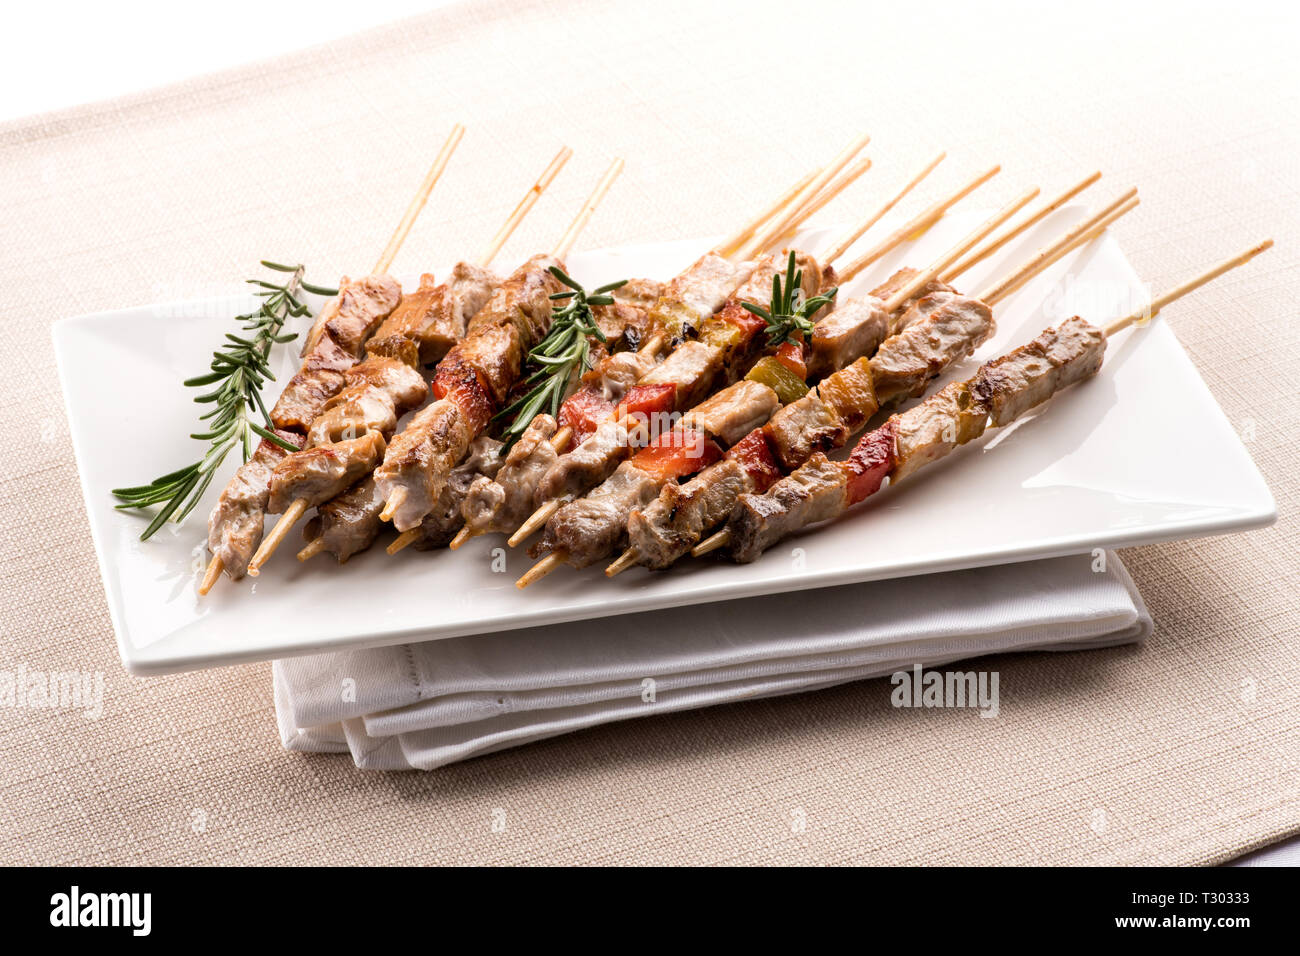 Arrosticini, or lamb skewers cooked over a canala brazier, from the Abruzzo  region of Southern Italy served on a plate on a folded napkin Stock Photo -  Alamy